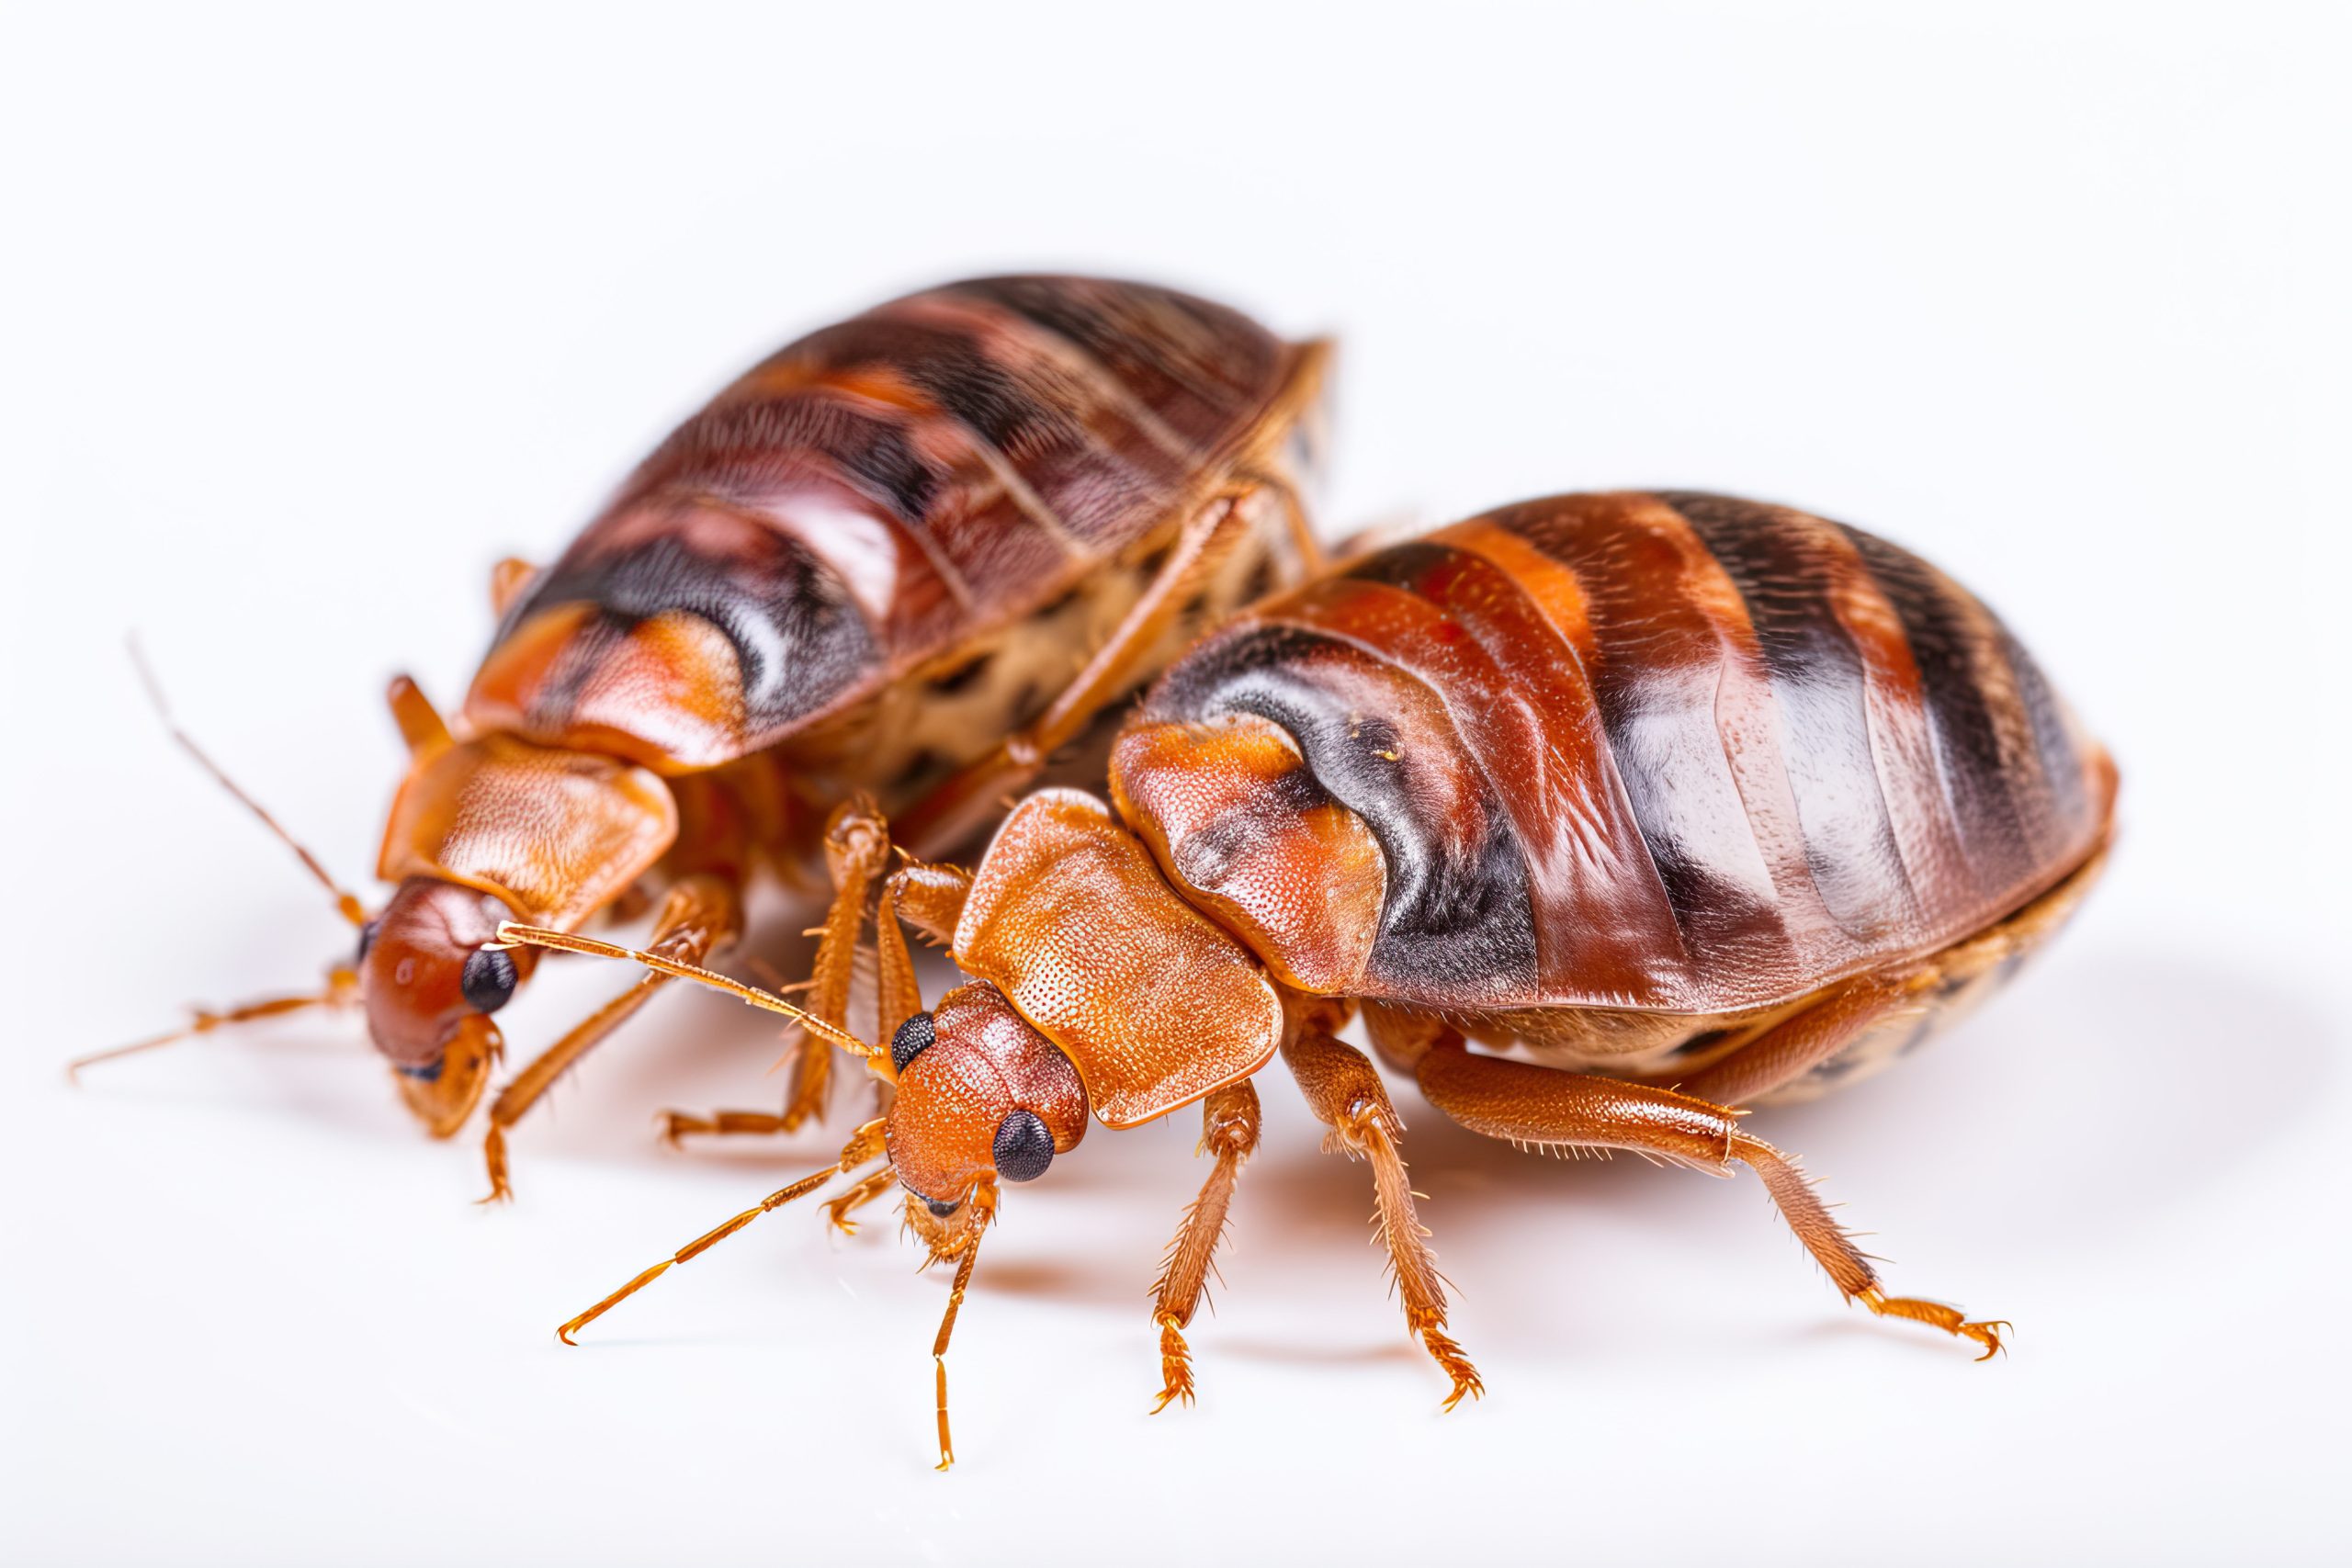 Should I buy a new bed after bed bugs?